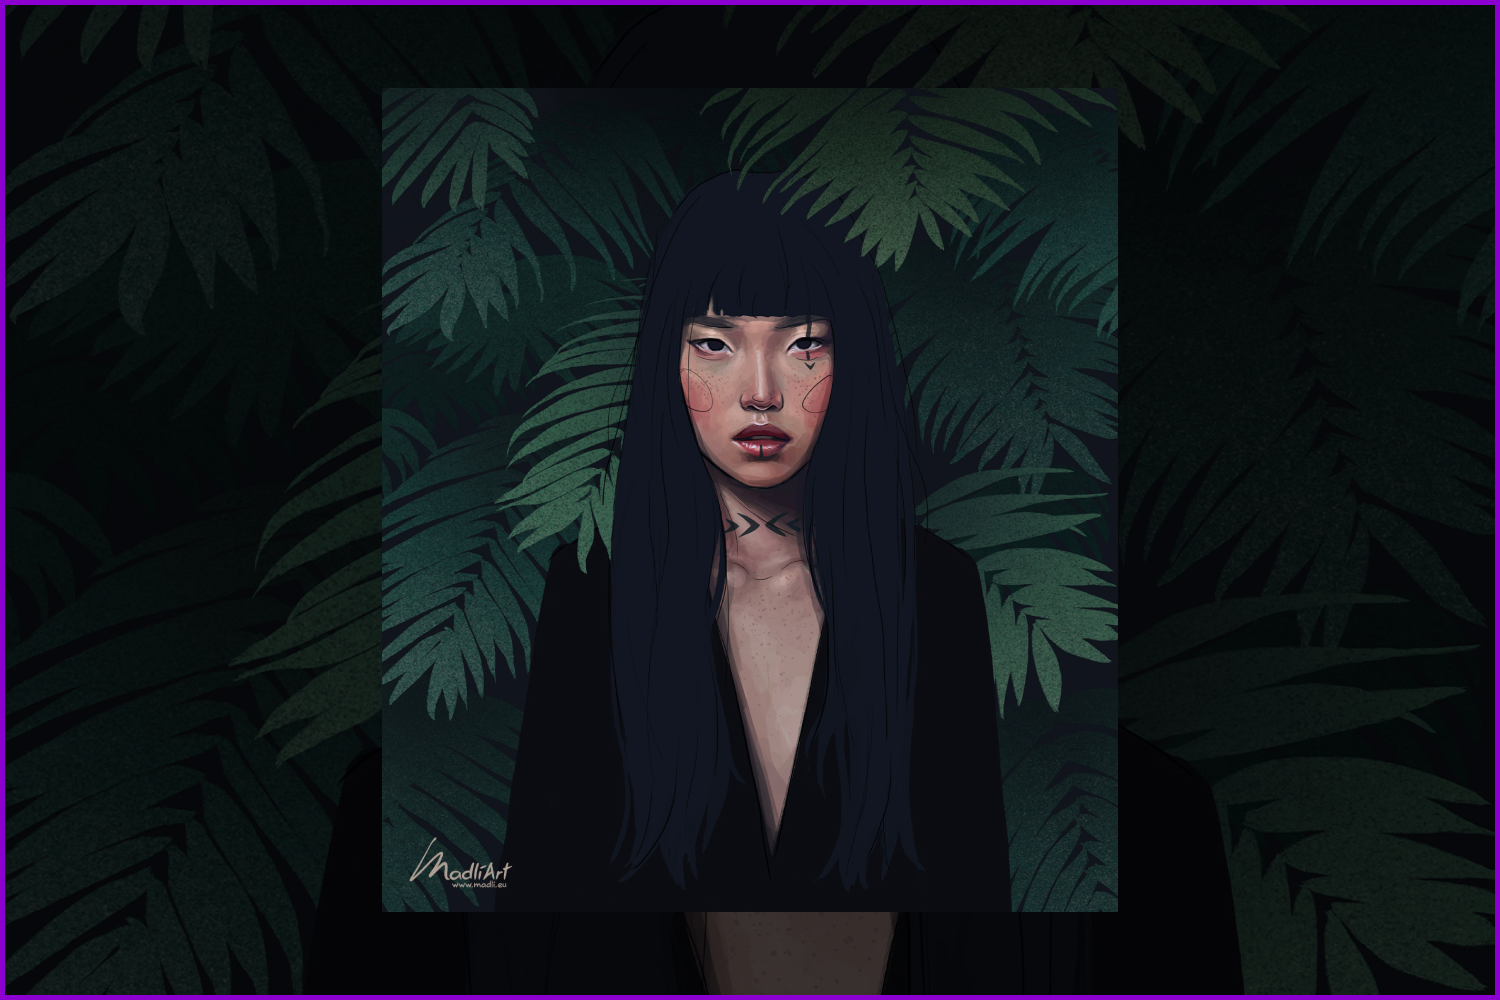 Asian girl with long hair on a background of ferns.